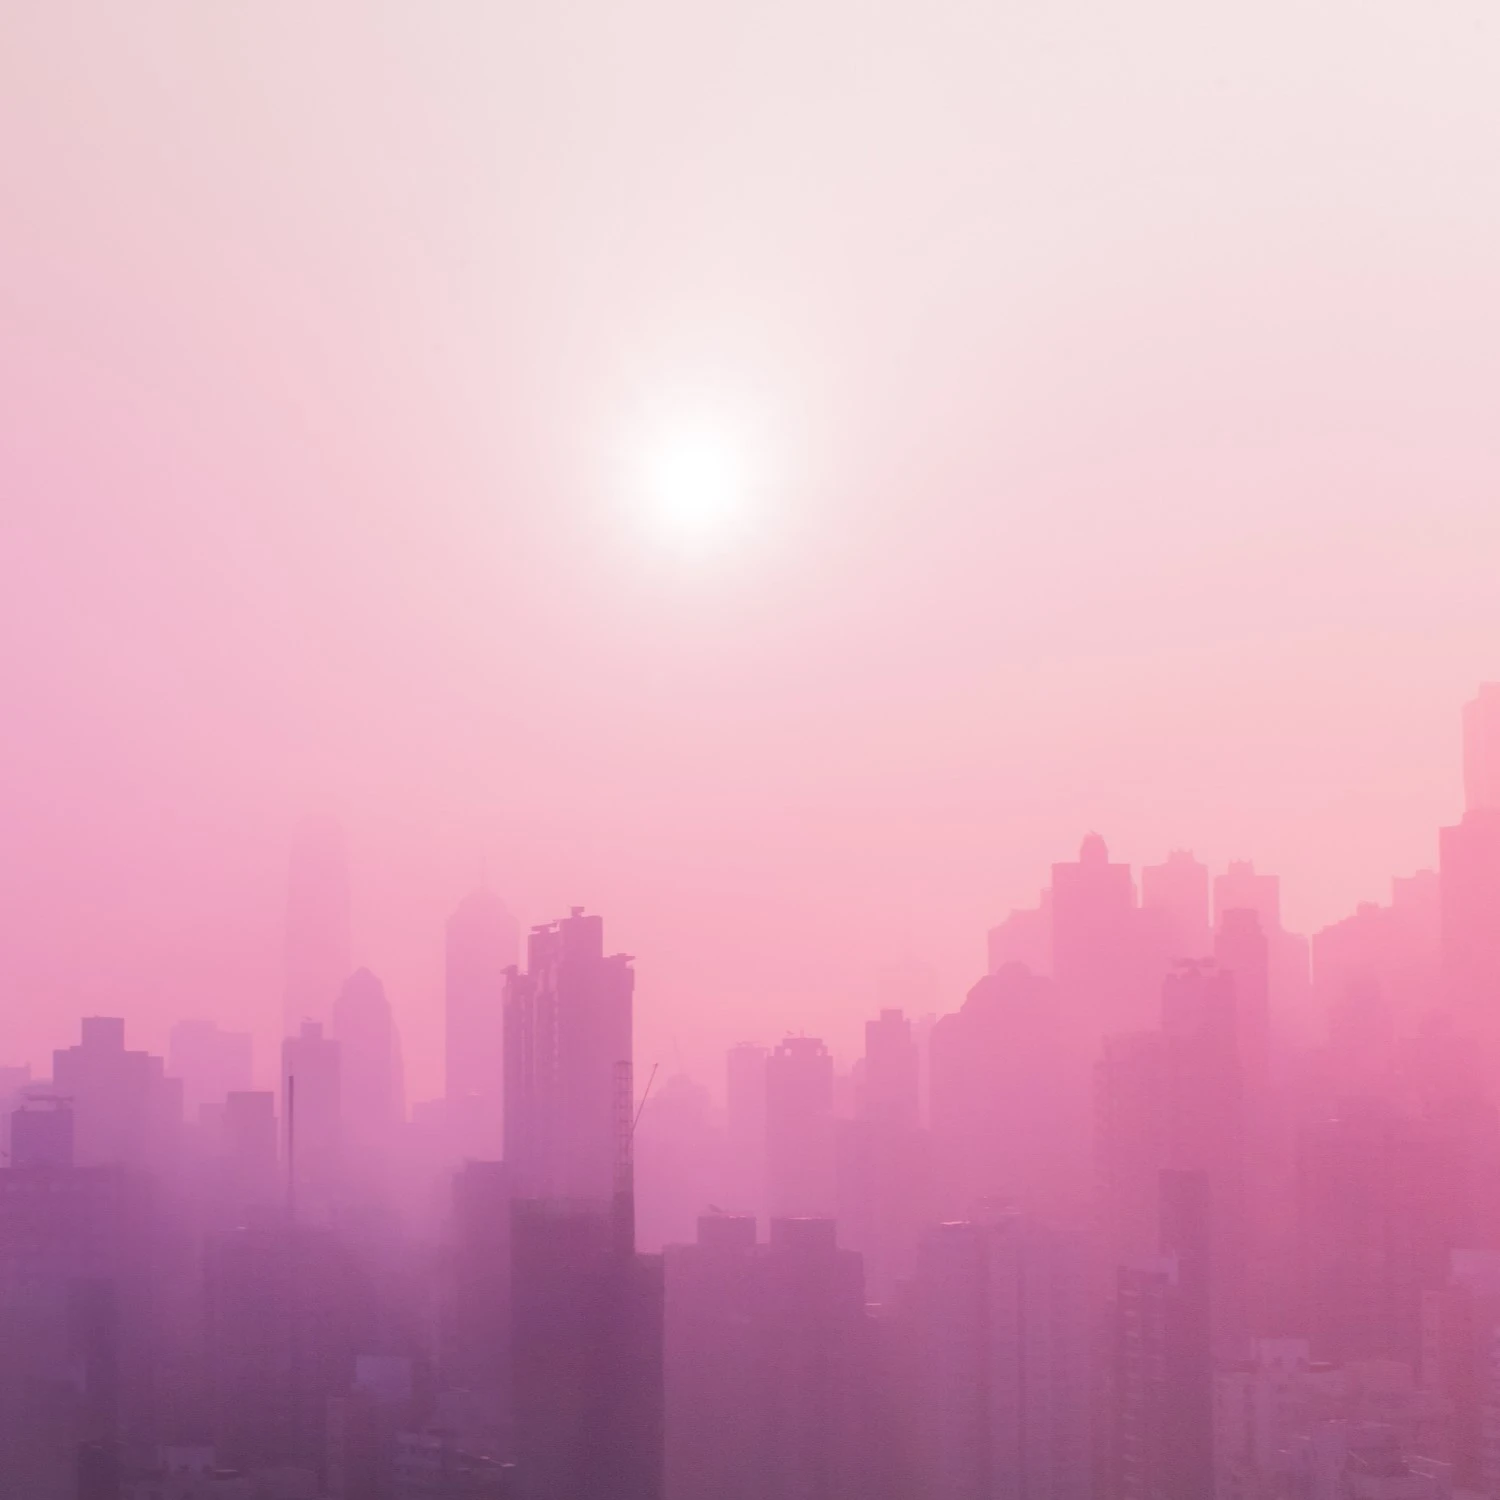 A Chicago-like city with a pink and purple tint.